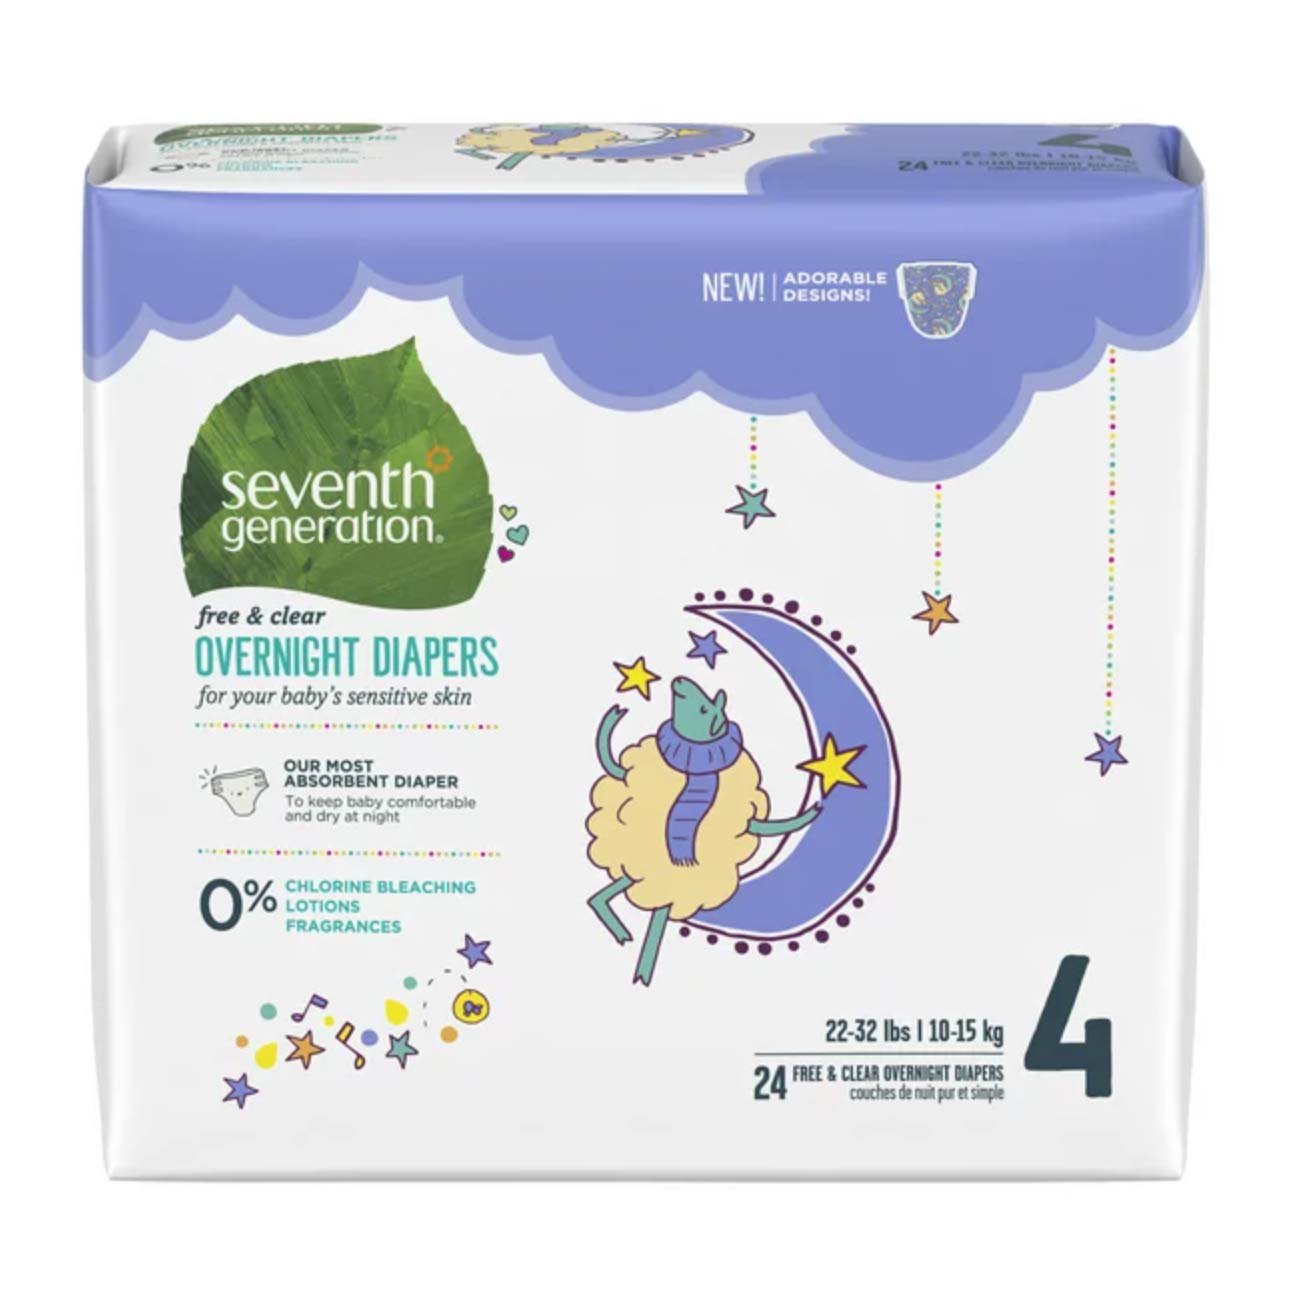 Diapers in white and lavender packaging